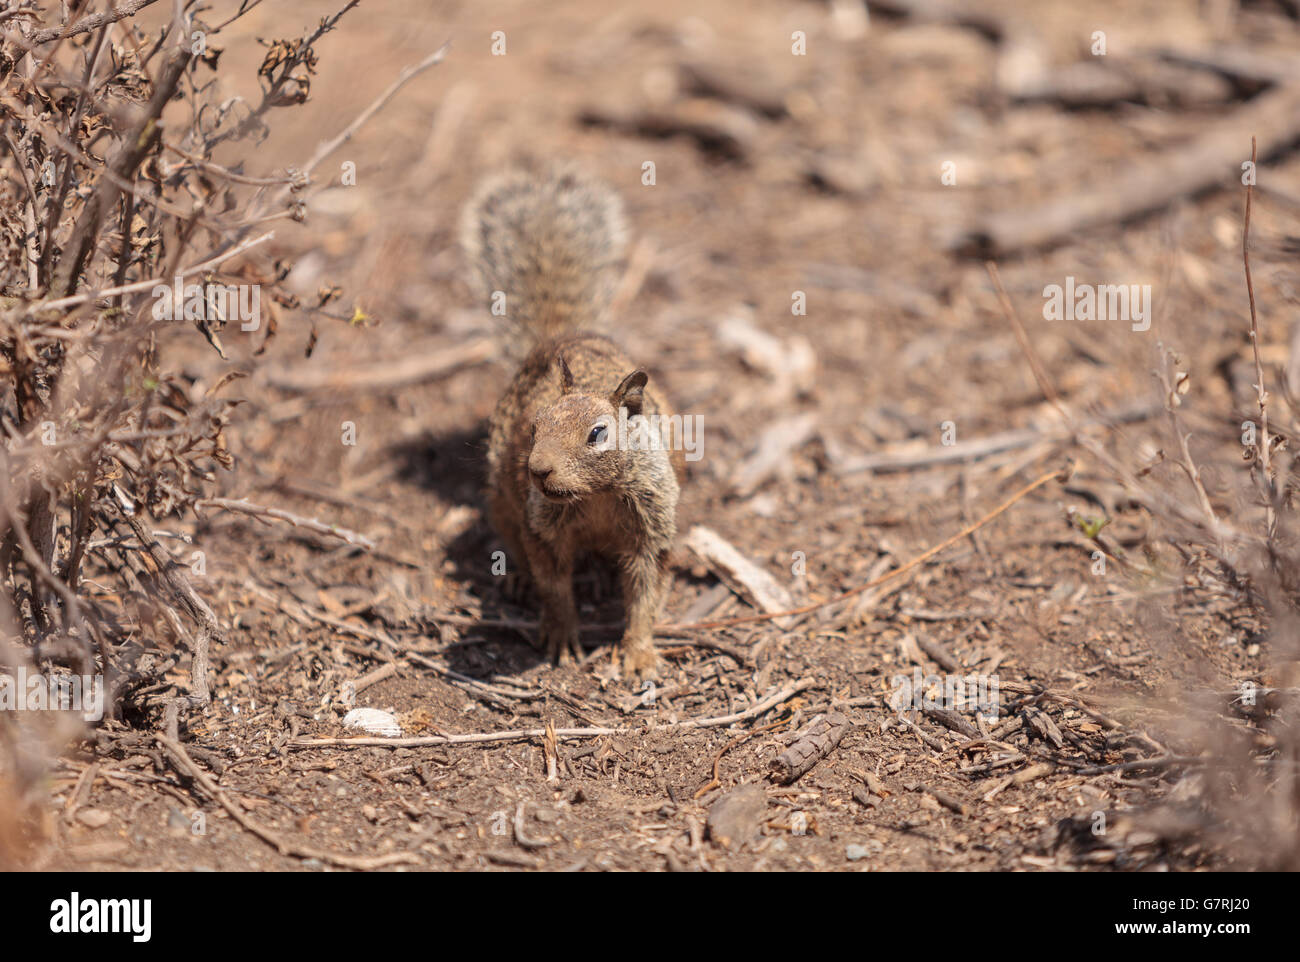 A young squirrel Otospermophilus beecheyi creeps along the ground in a marsh in Southern California, United States in summer Stock Photo